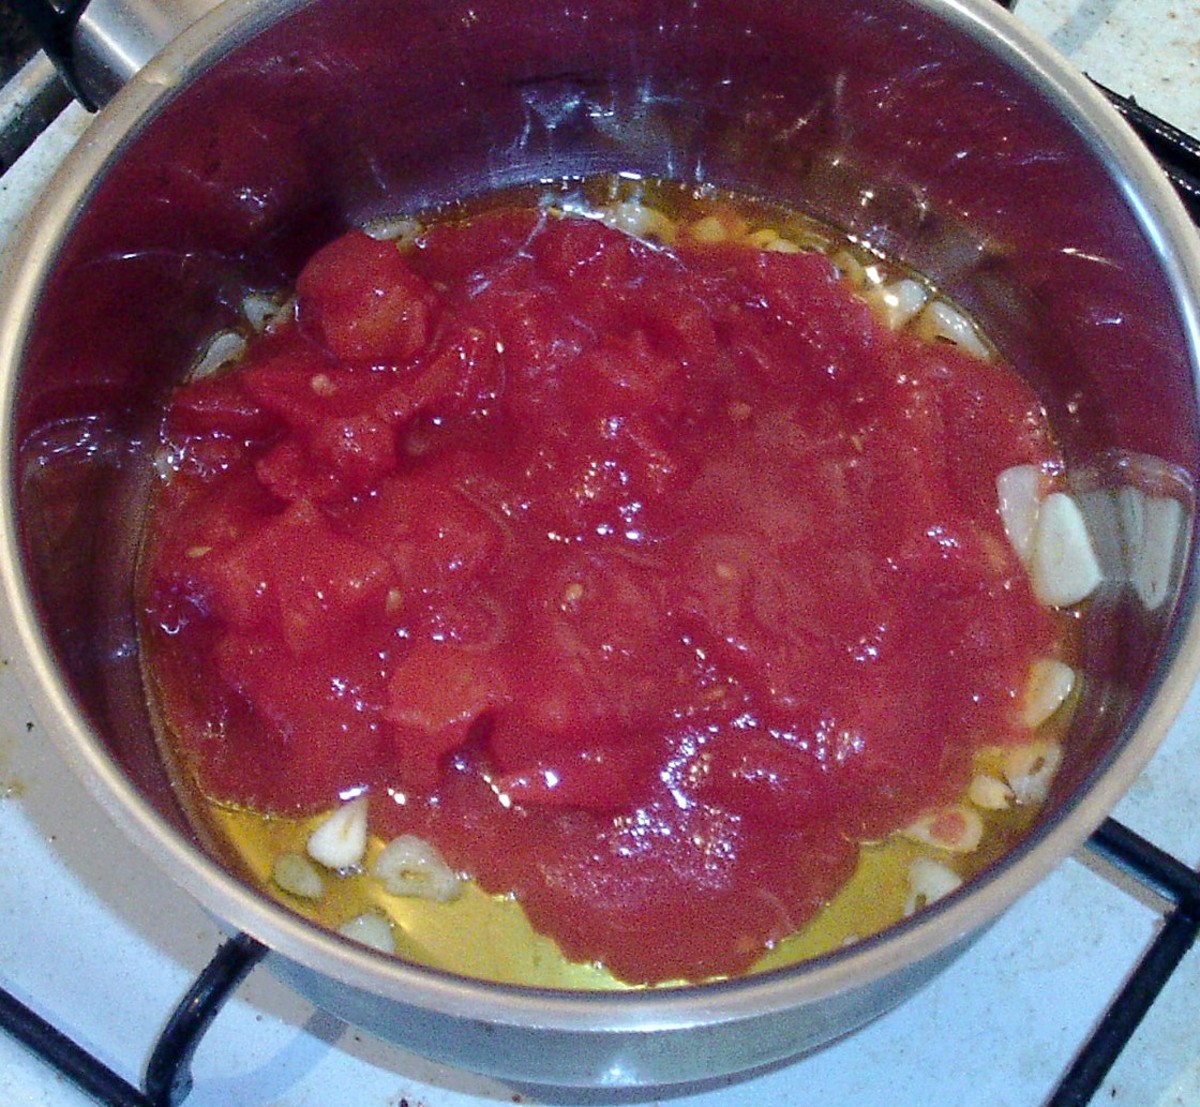 Canned tomatoes are added to softened garlic.